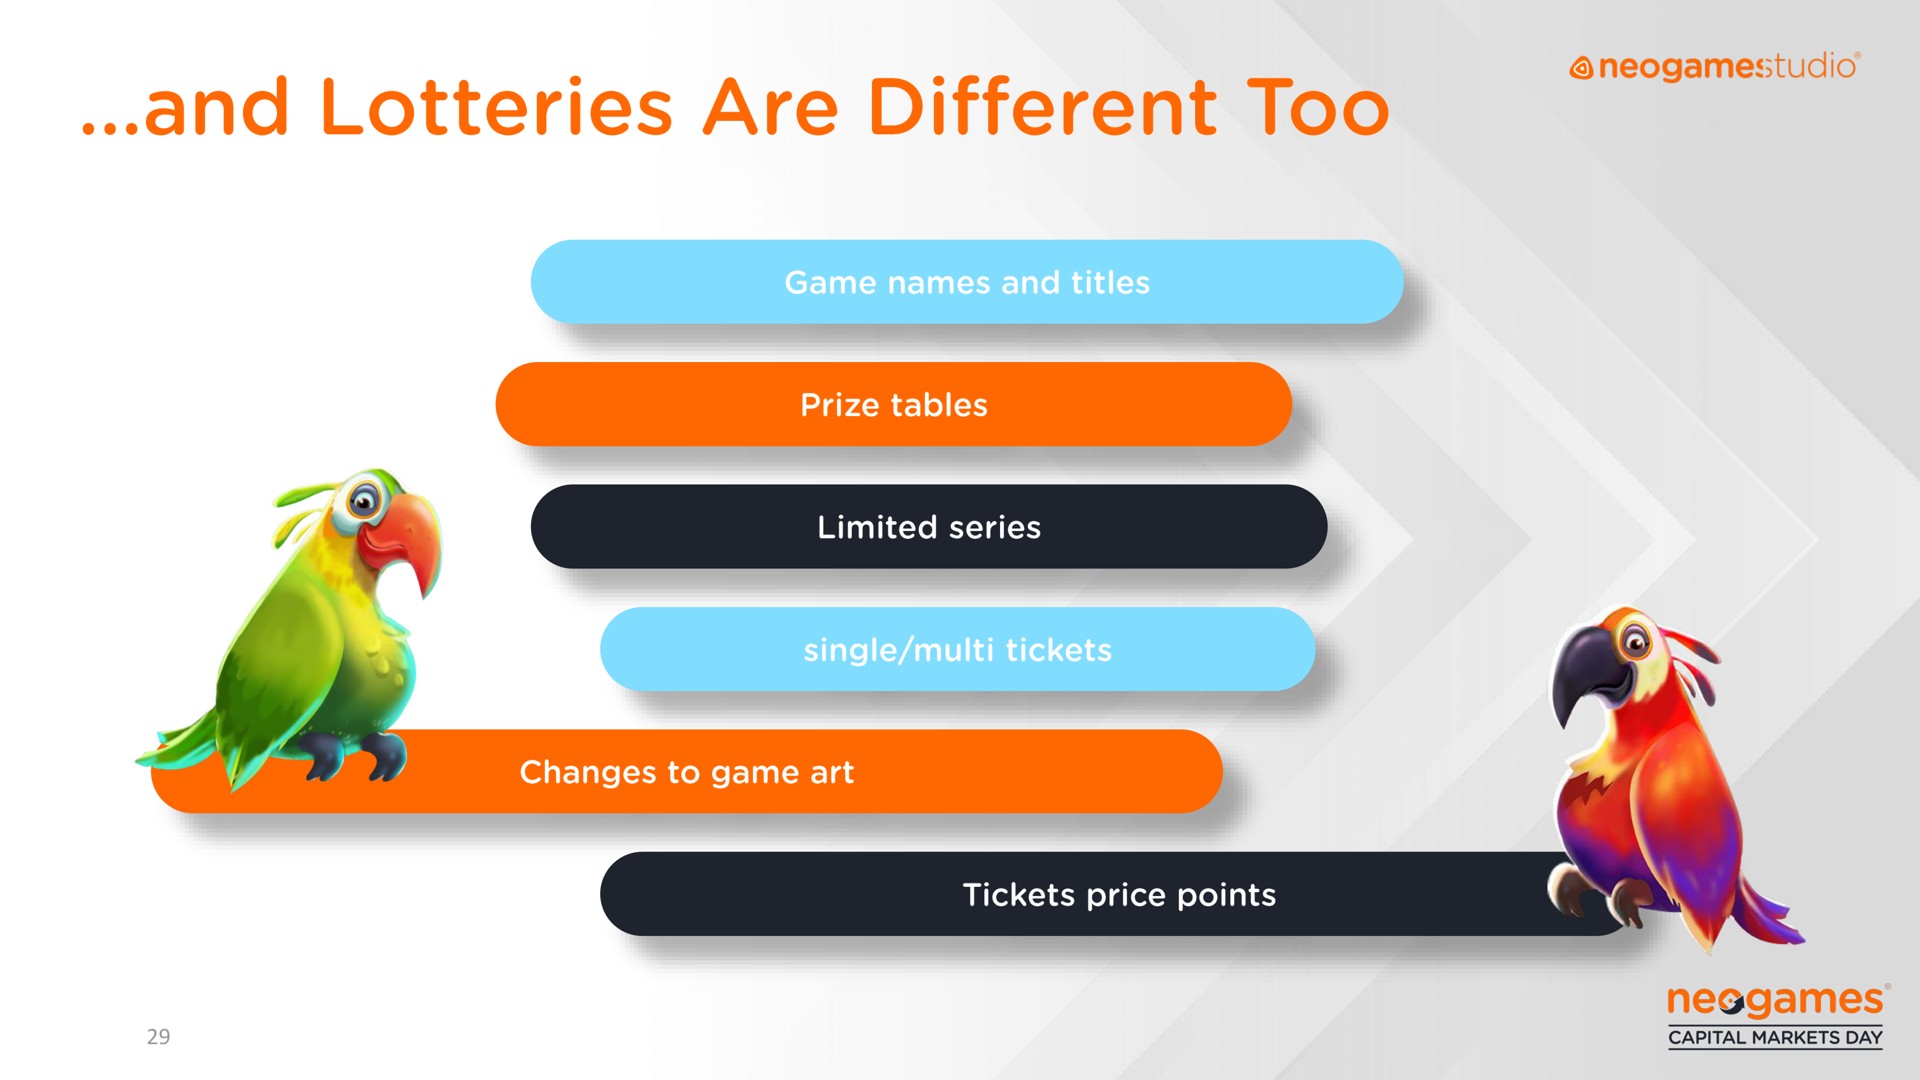 and lotteries are different too | Neogames